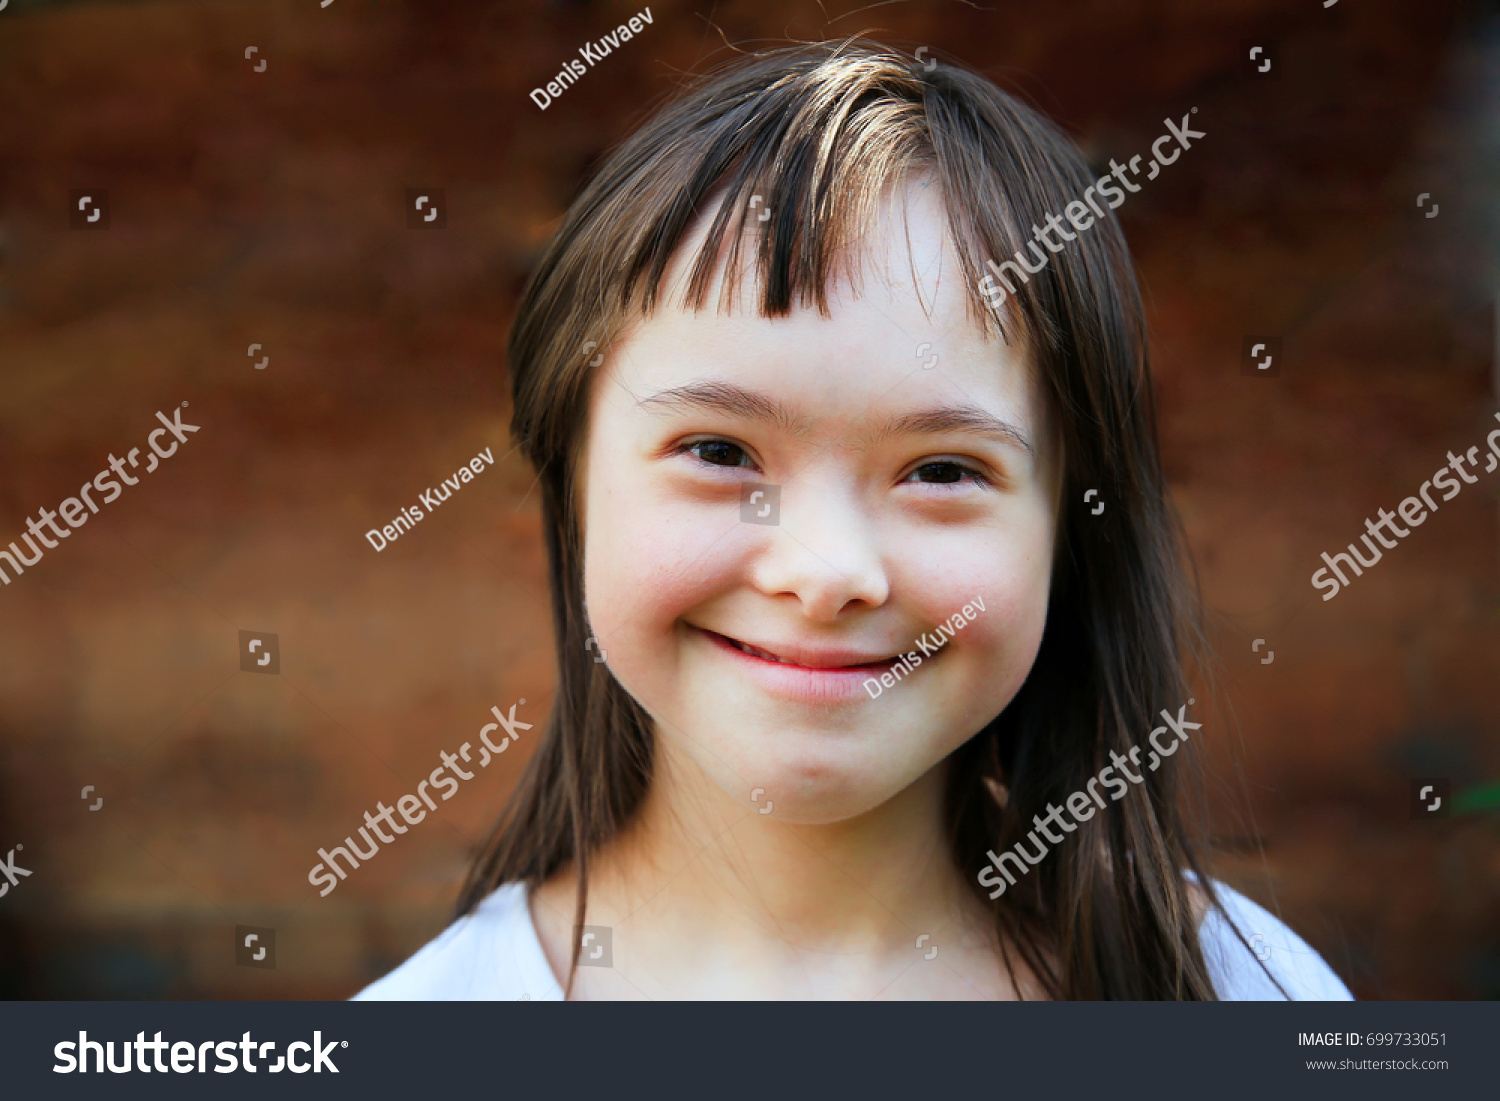 Cute smiling down syndrome girl on the brown background #699733051